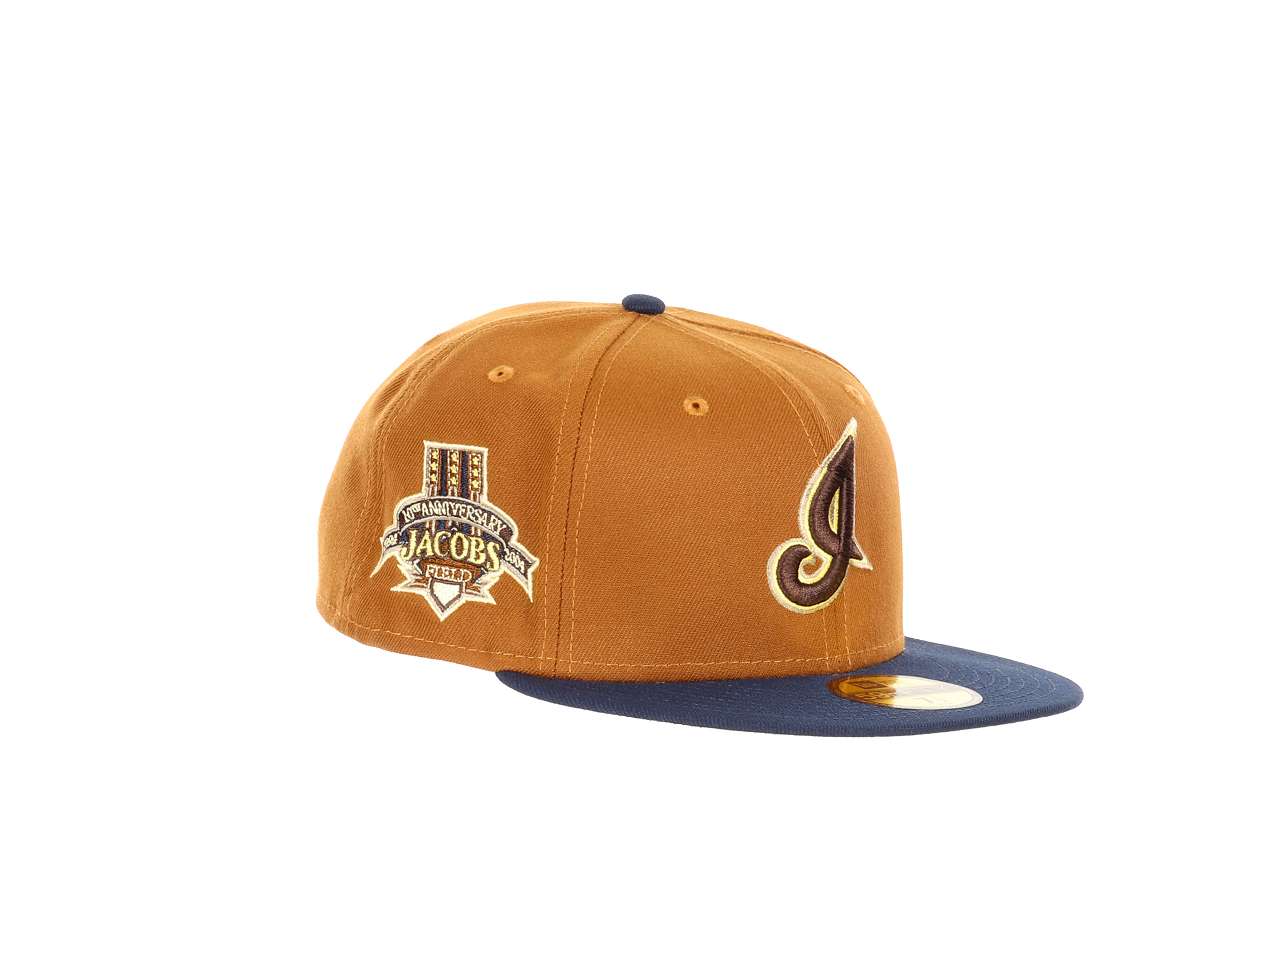 Cleveland Indians MLB Jacobs Field 10th Anniversary Sidepatch Brown Blue 59Fifty Basecap New Era